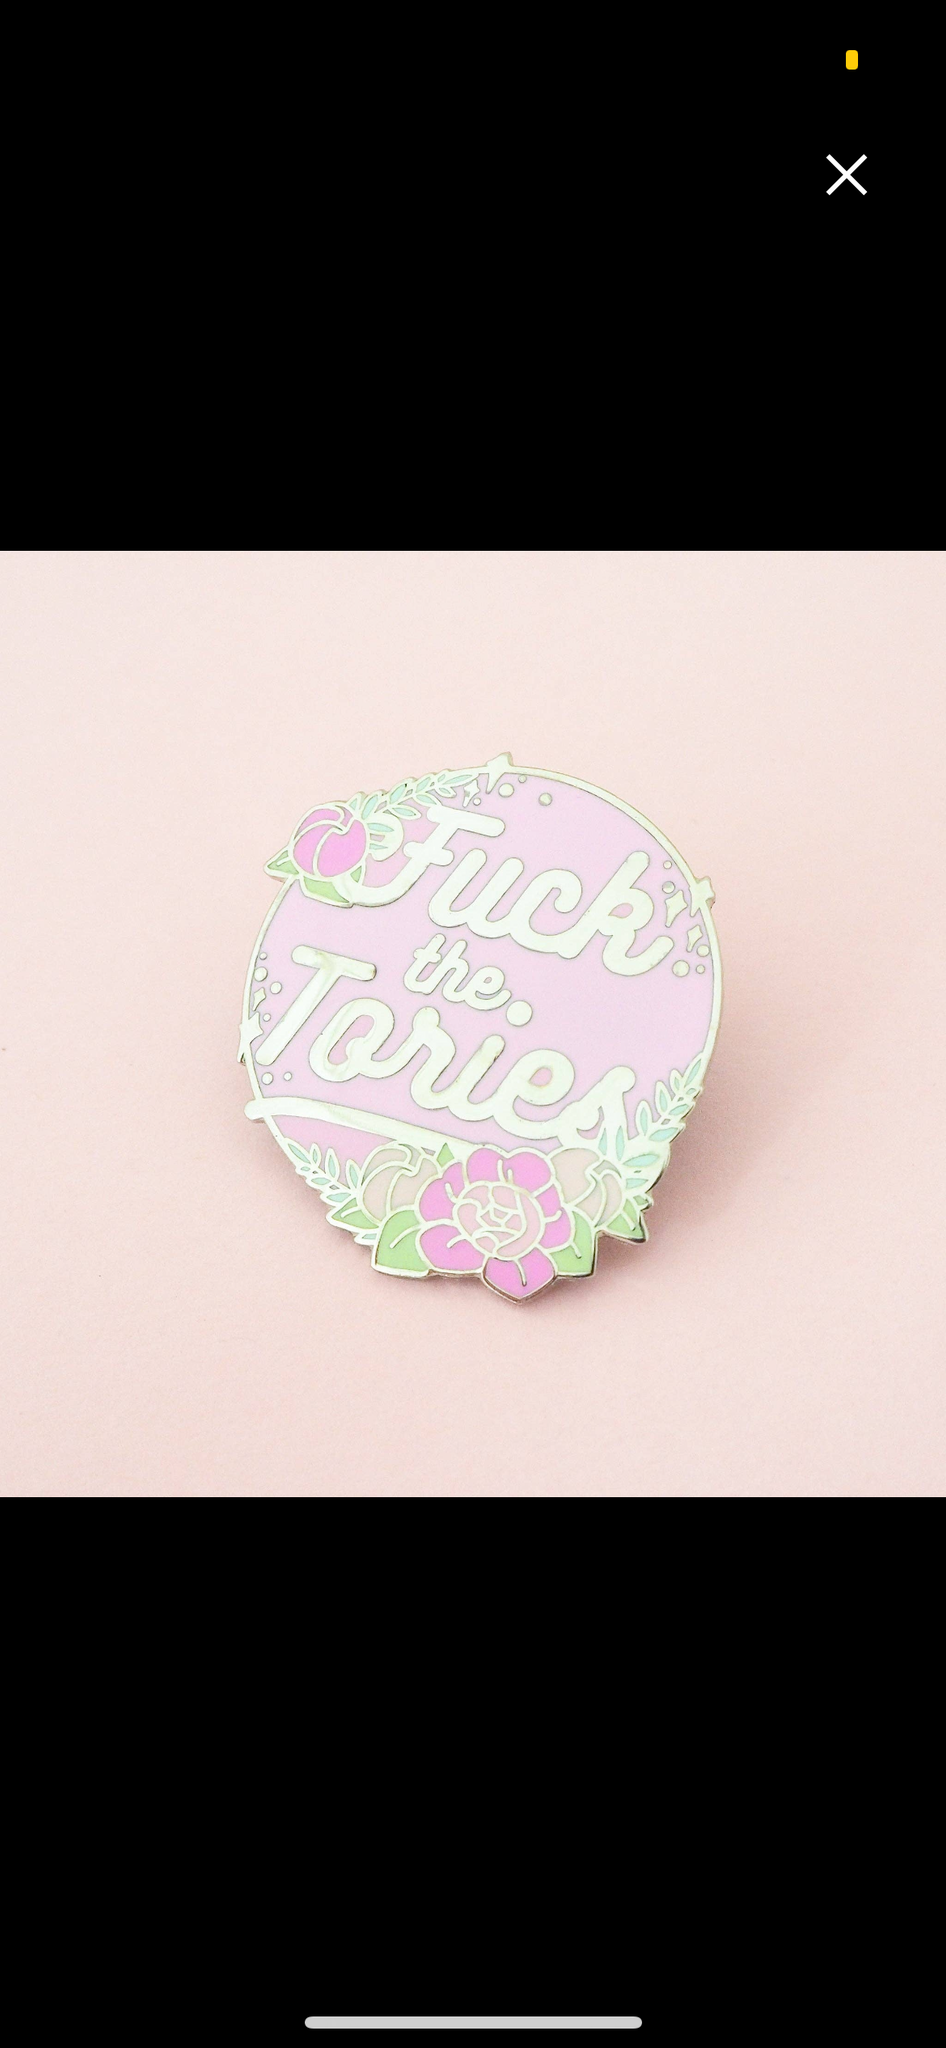 Fuck The Tories Floral Enamel Pin